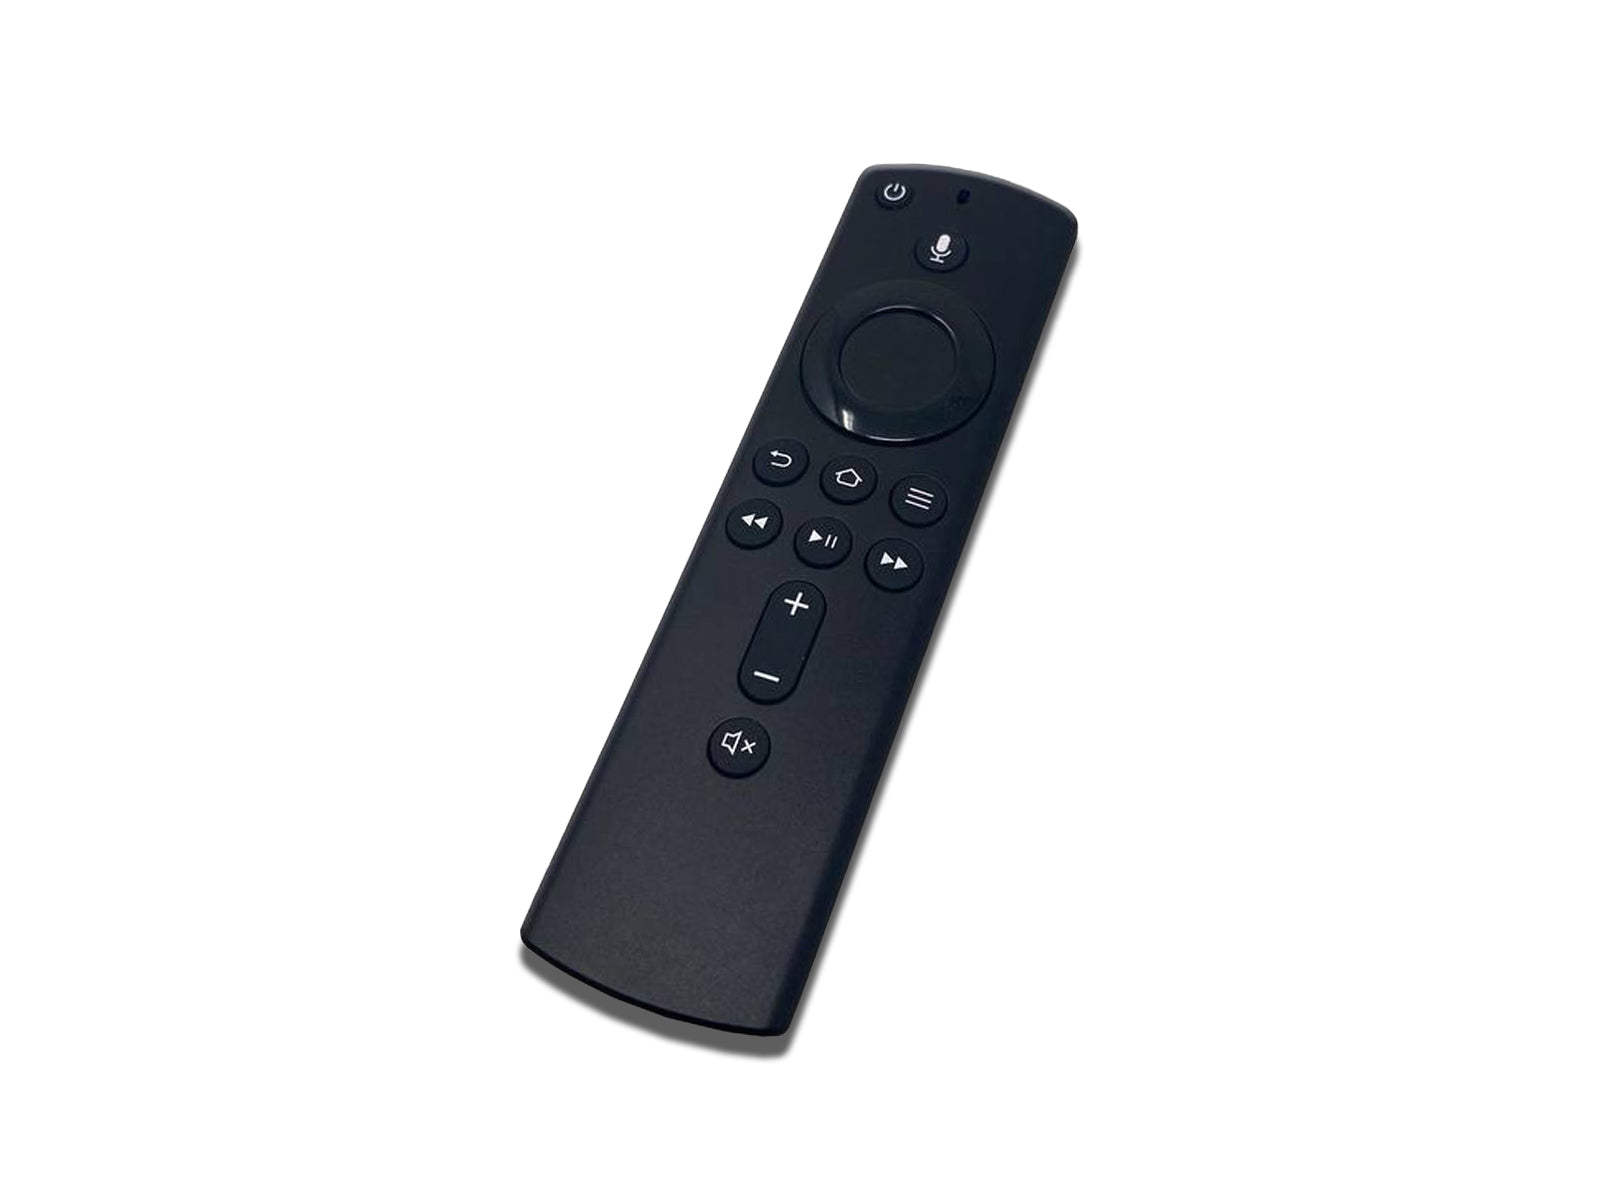 Side view image of the fire stick remote 2nd gen in the white background